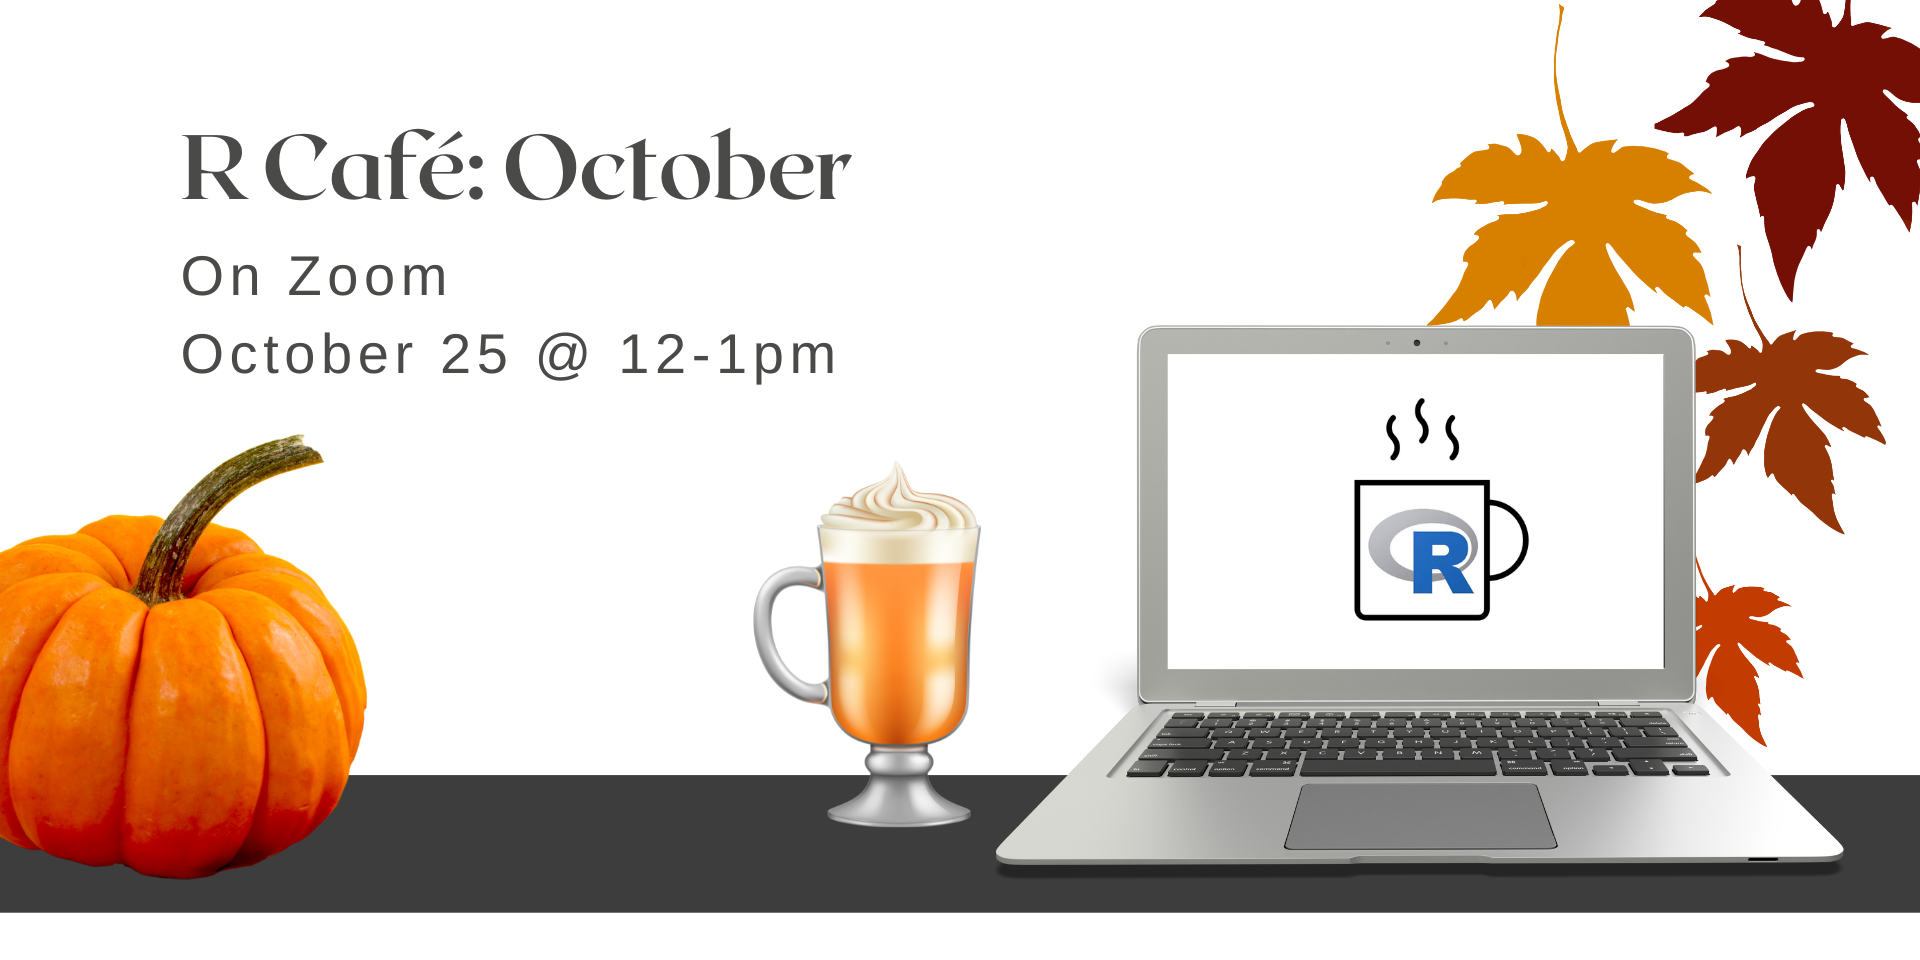 Laptop with R Café logo, frothy orange drink, and a pumpkin with leaves in the background and the text: R Café October. On Zoom. October 25 at 12-1pm